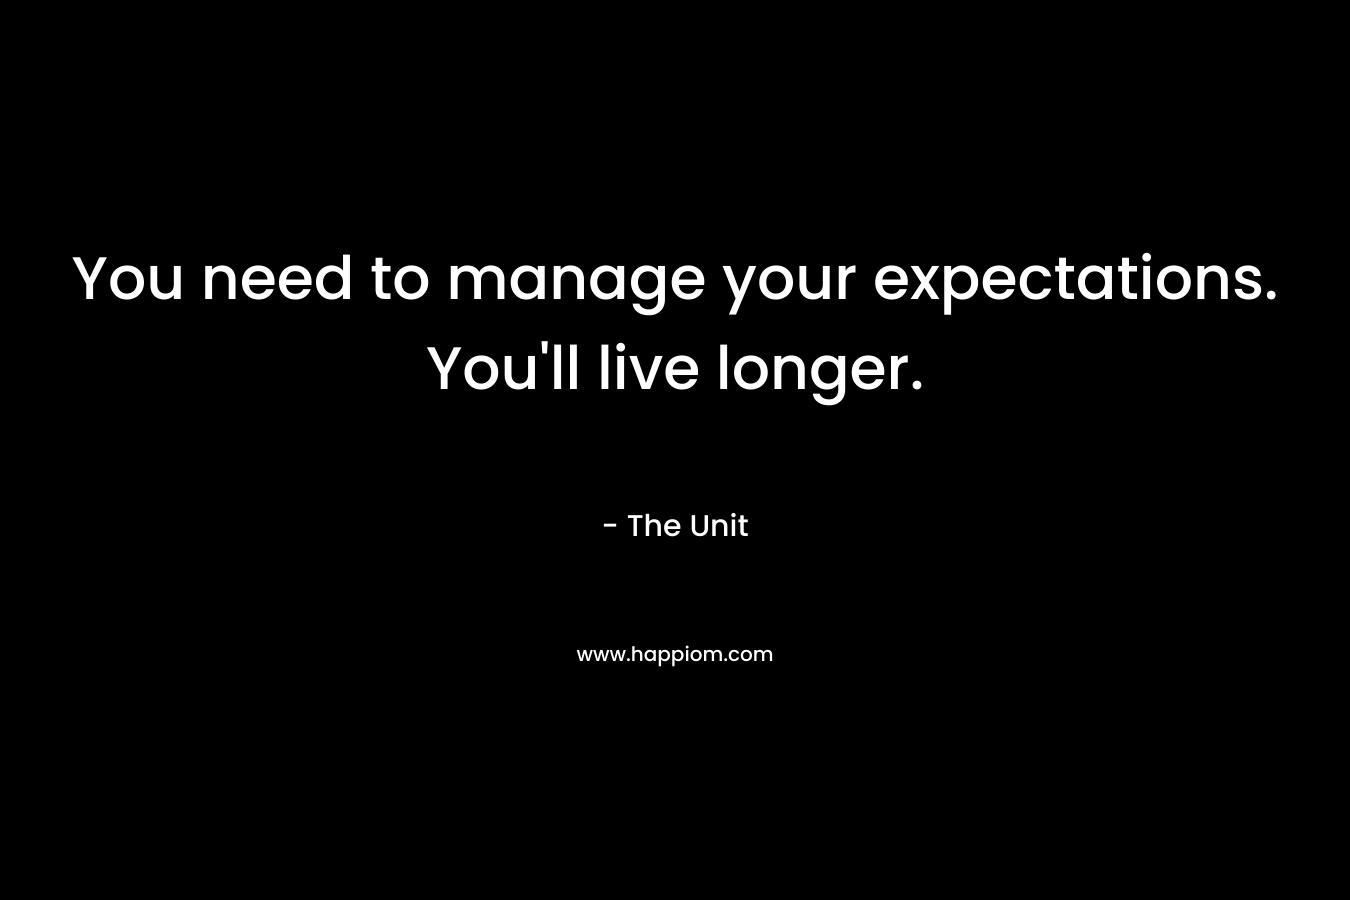 You need to manage your expectations. You'll live longer.